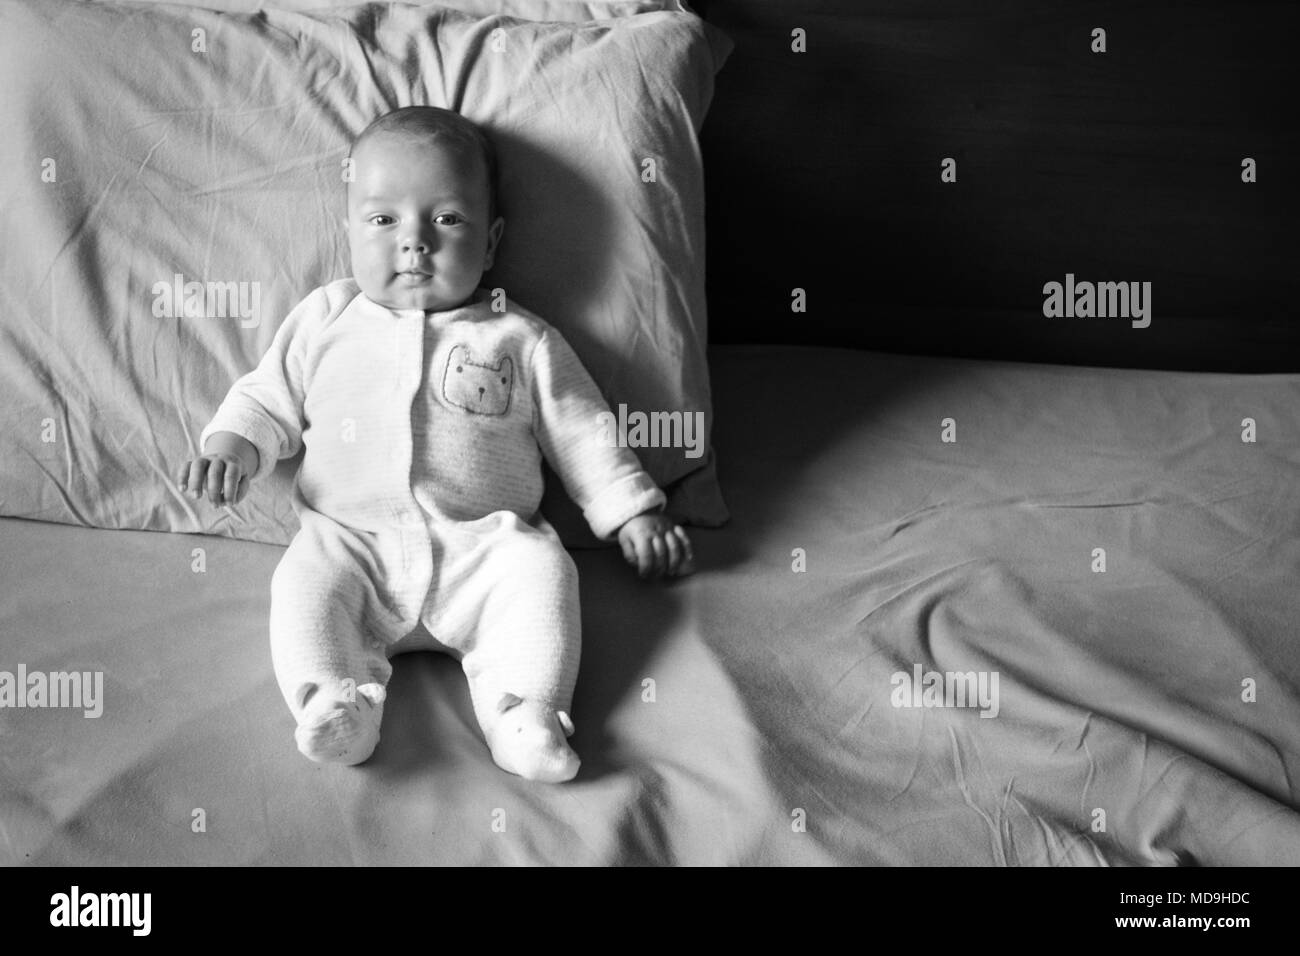 Portrait of a cute little baby lying on bed, Banque D'Images